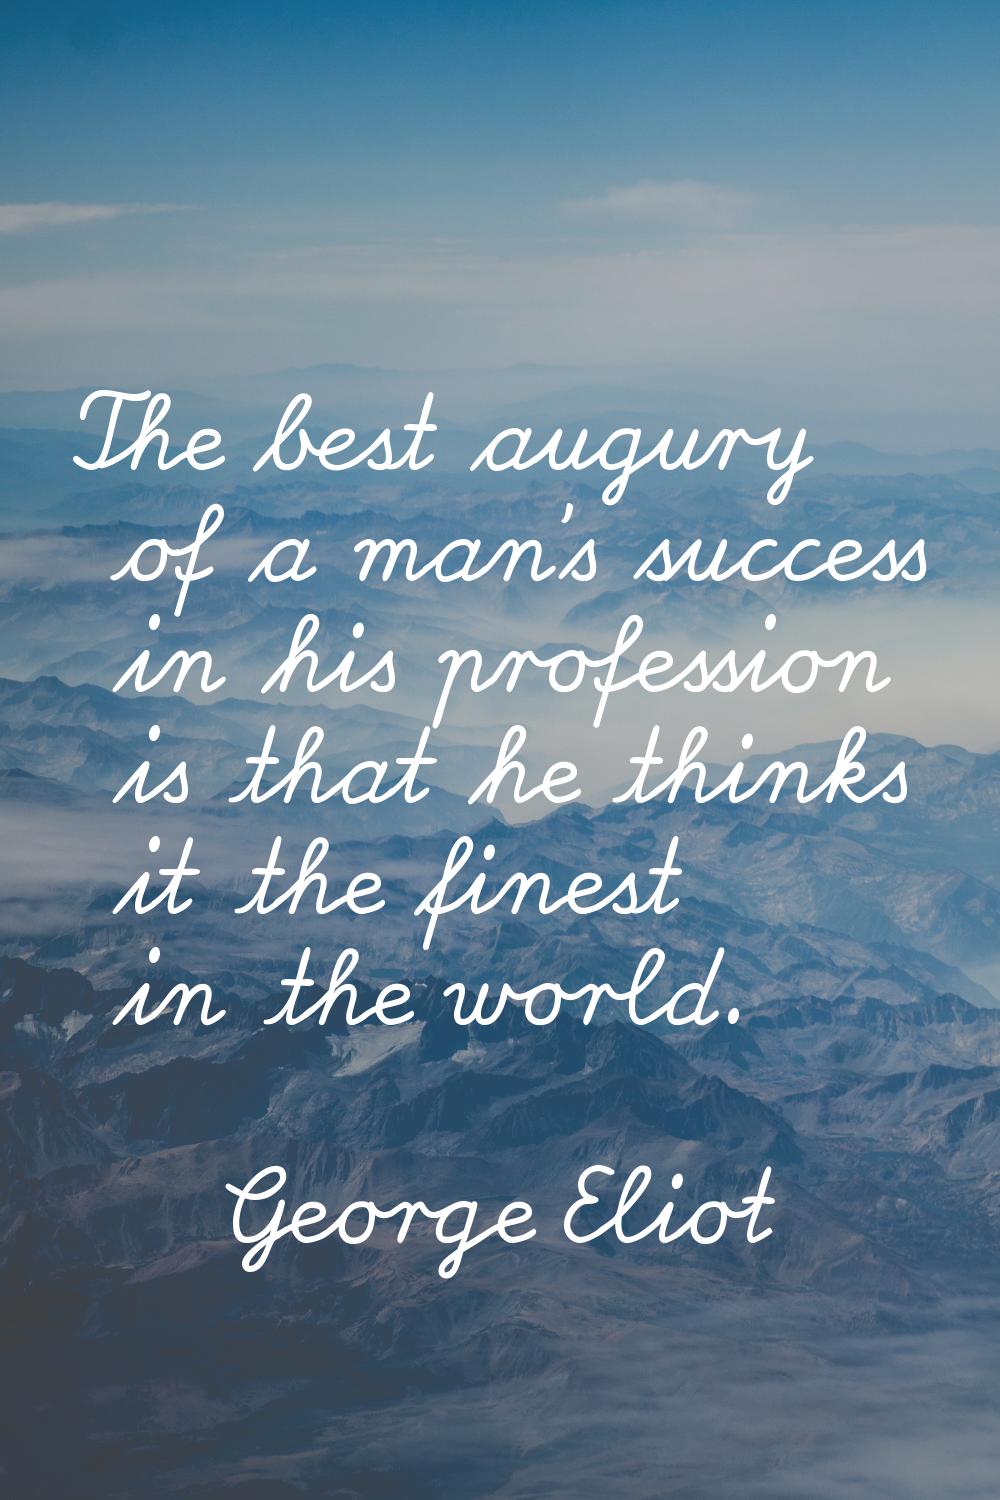 The best augury of a man's success in his profession is that he thinks it the finest in the world.